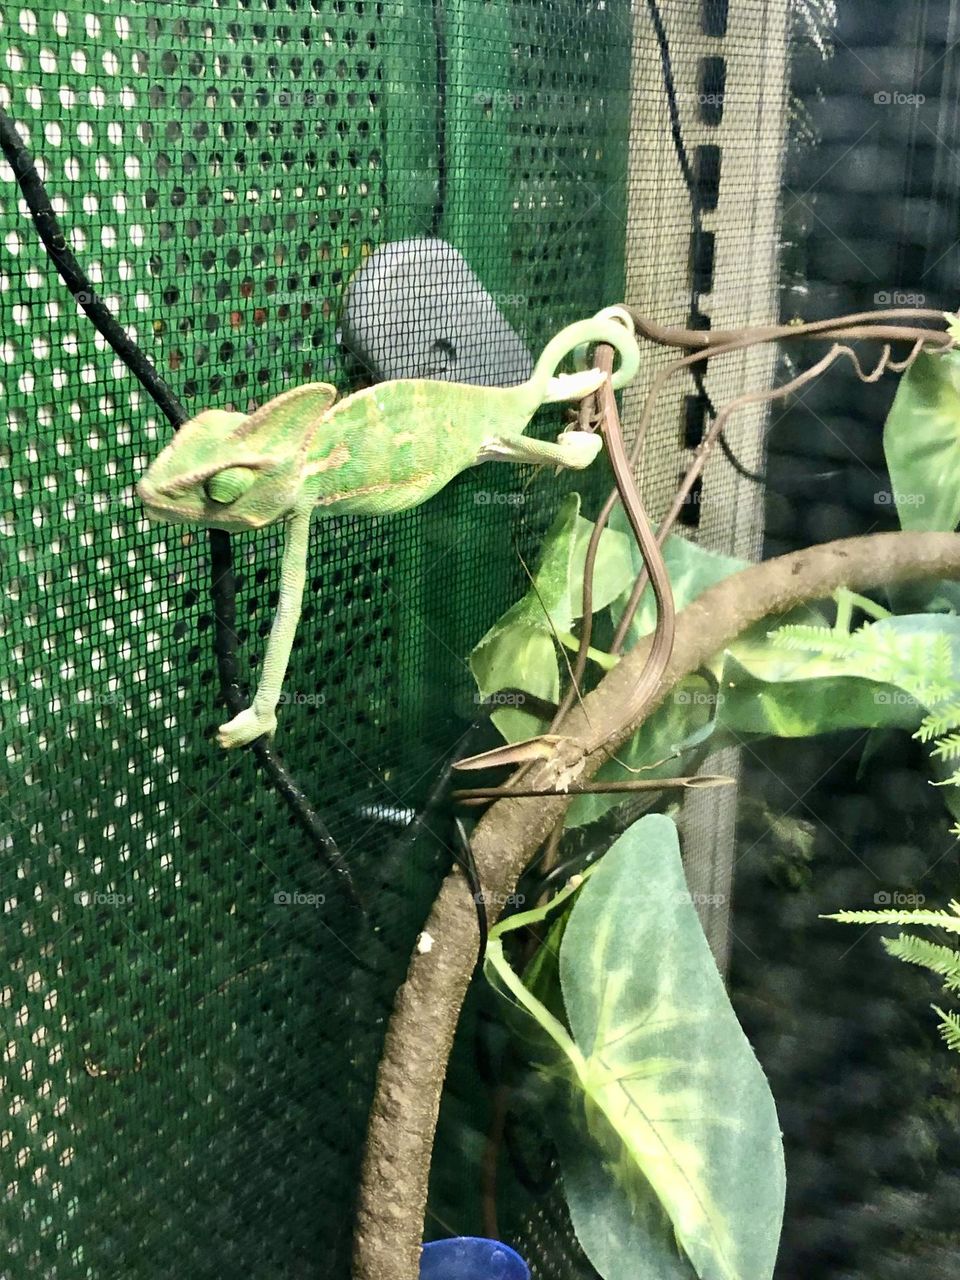 Visiting the Pet store -Chameleon cute  🌿